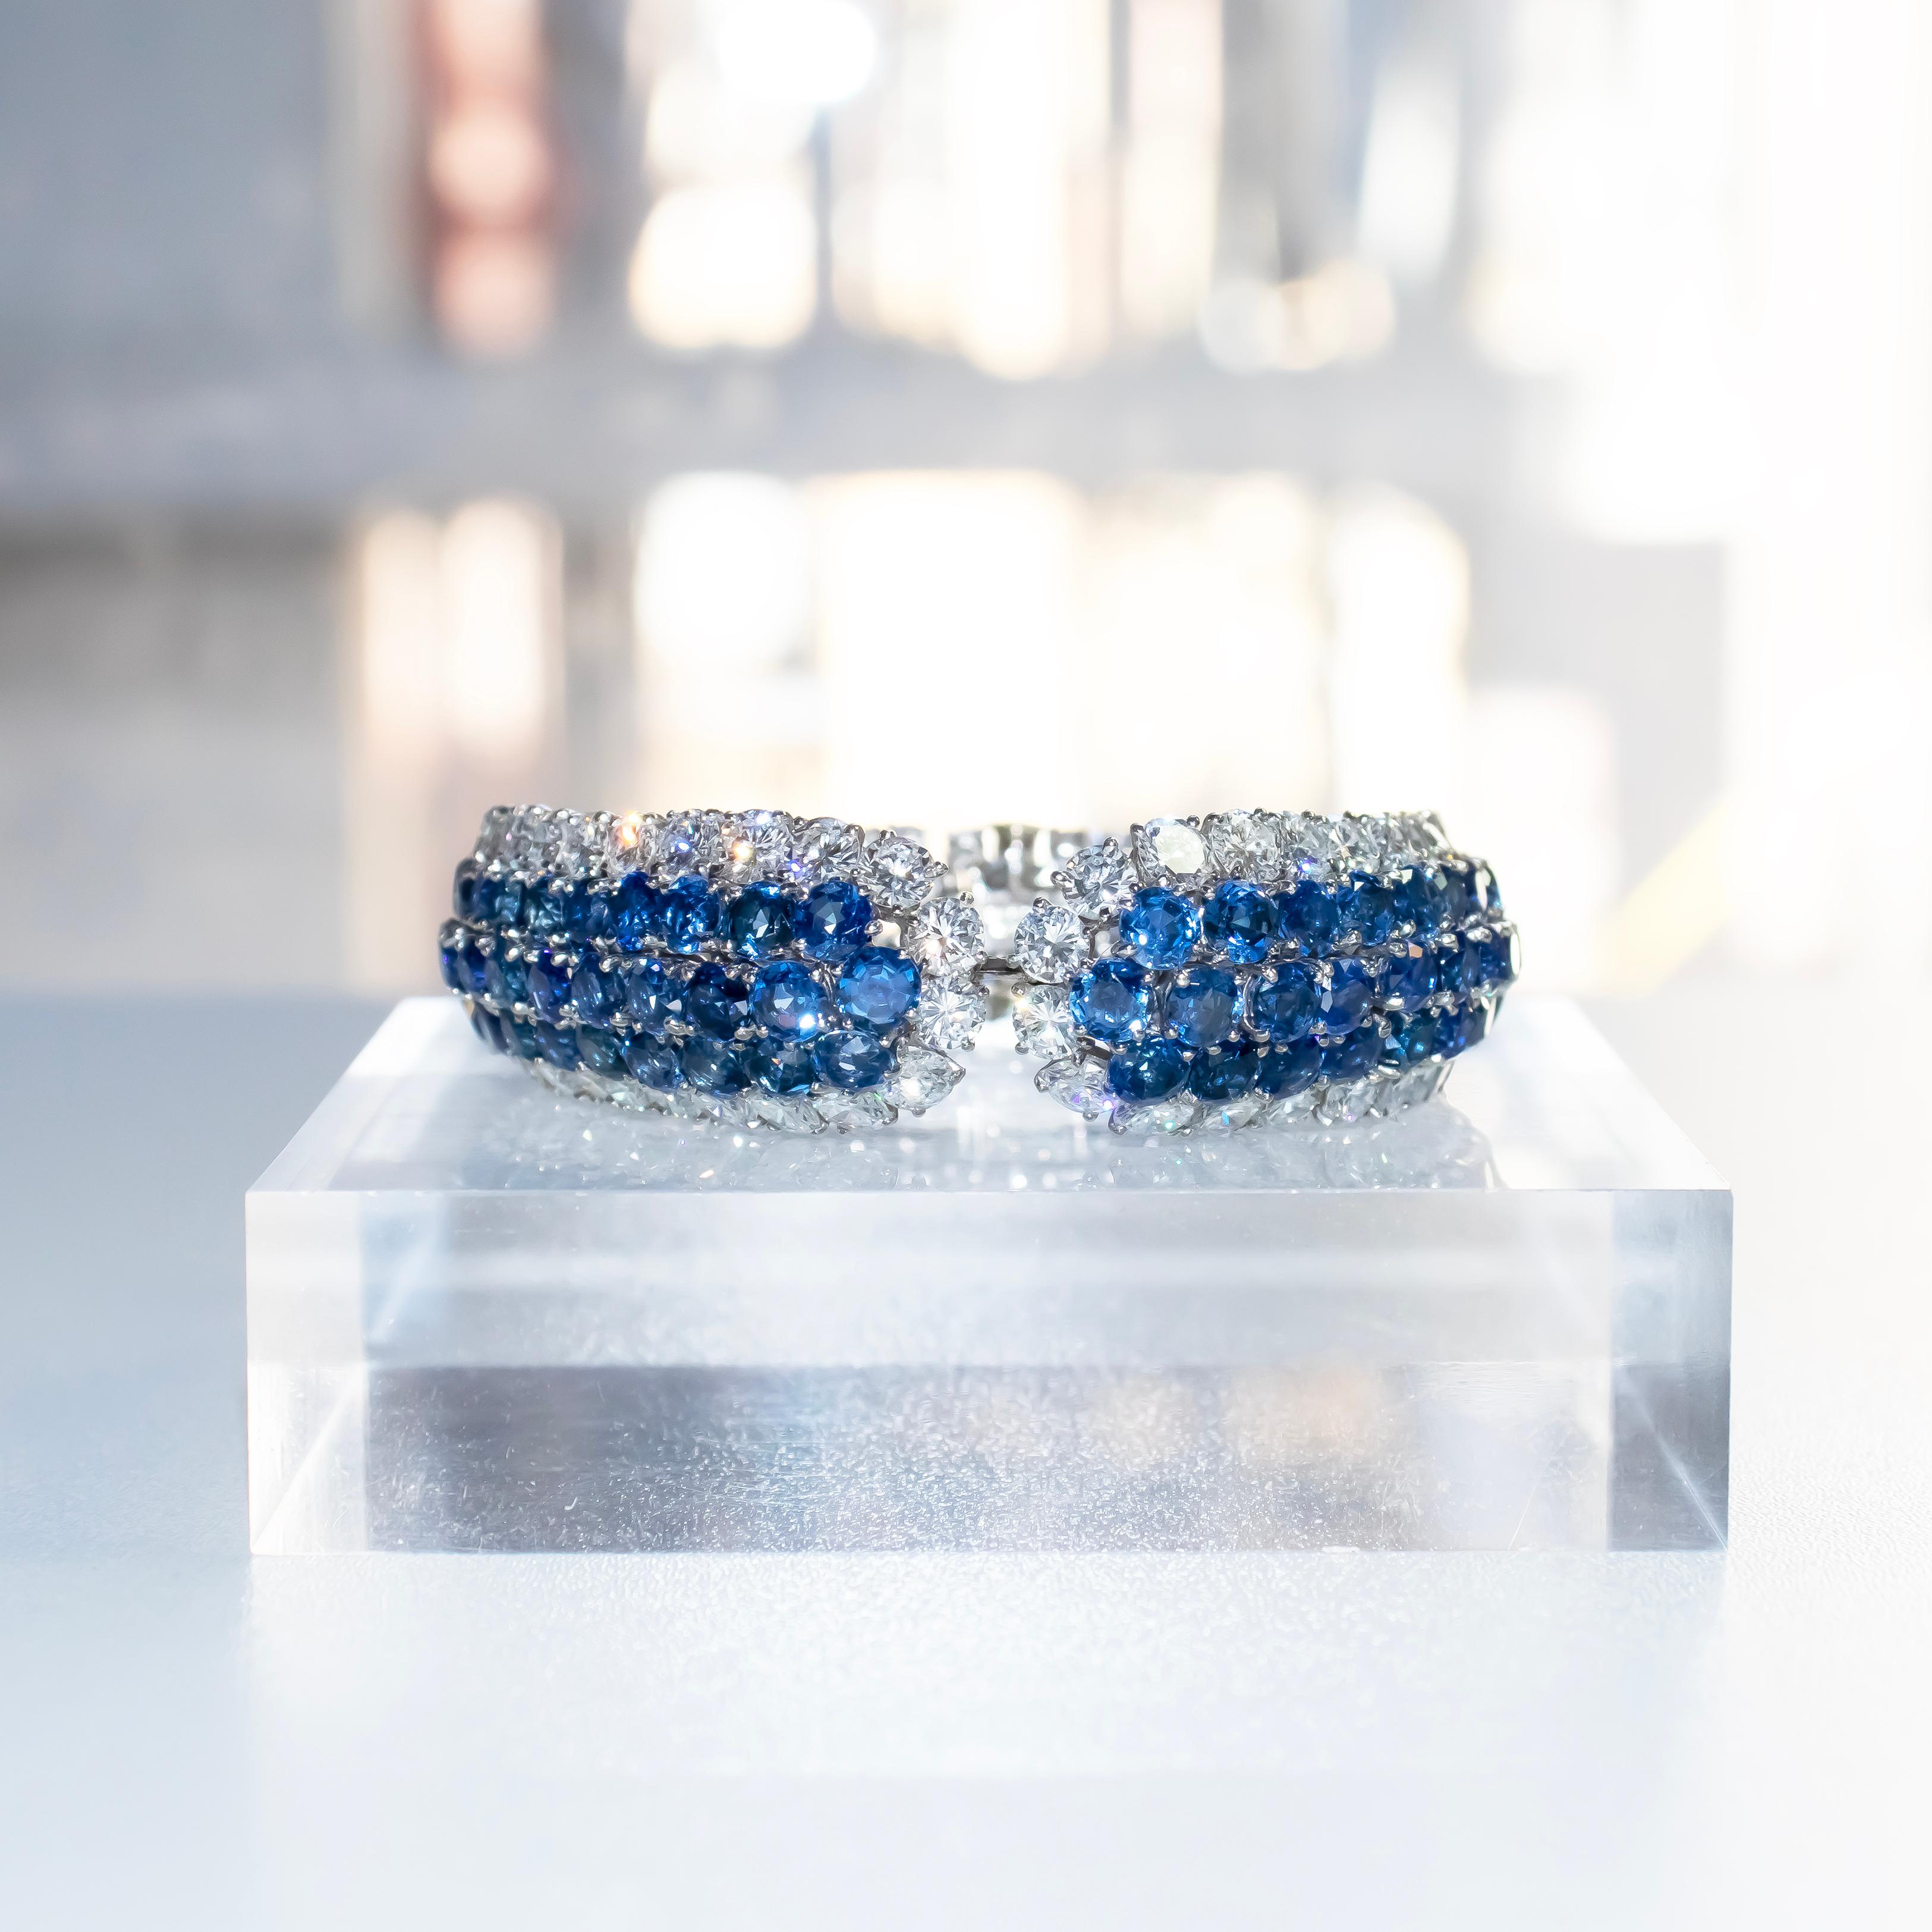 This exquisite, handmade bracelet by Van Cleef & Arpels is a masterful work of art. Featuring a dazzling assortment of 132 blue sapphires of graduated sizes (ranging from 3.5 mm - 5.0 mm each) and 92 round brilliant cut diamonds = approximately